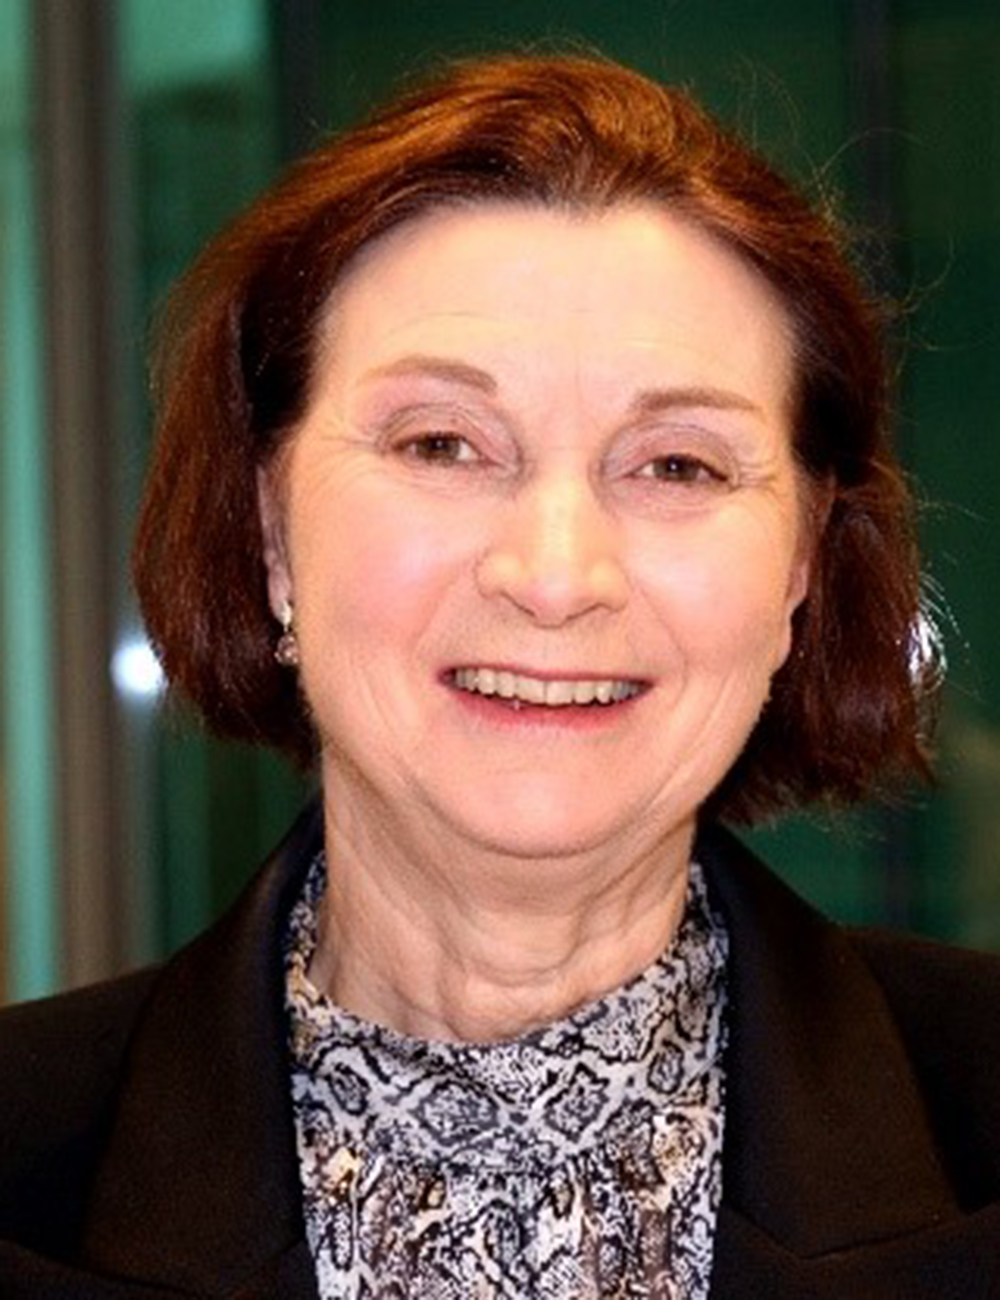 Dr. Marion Healy